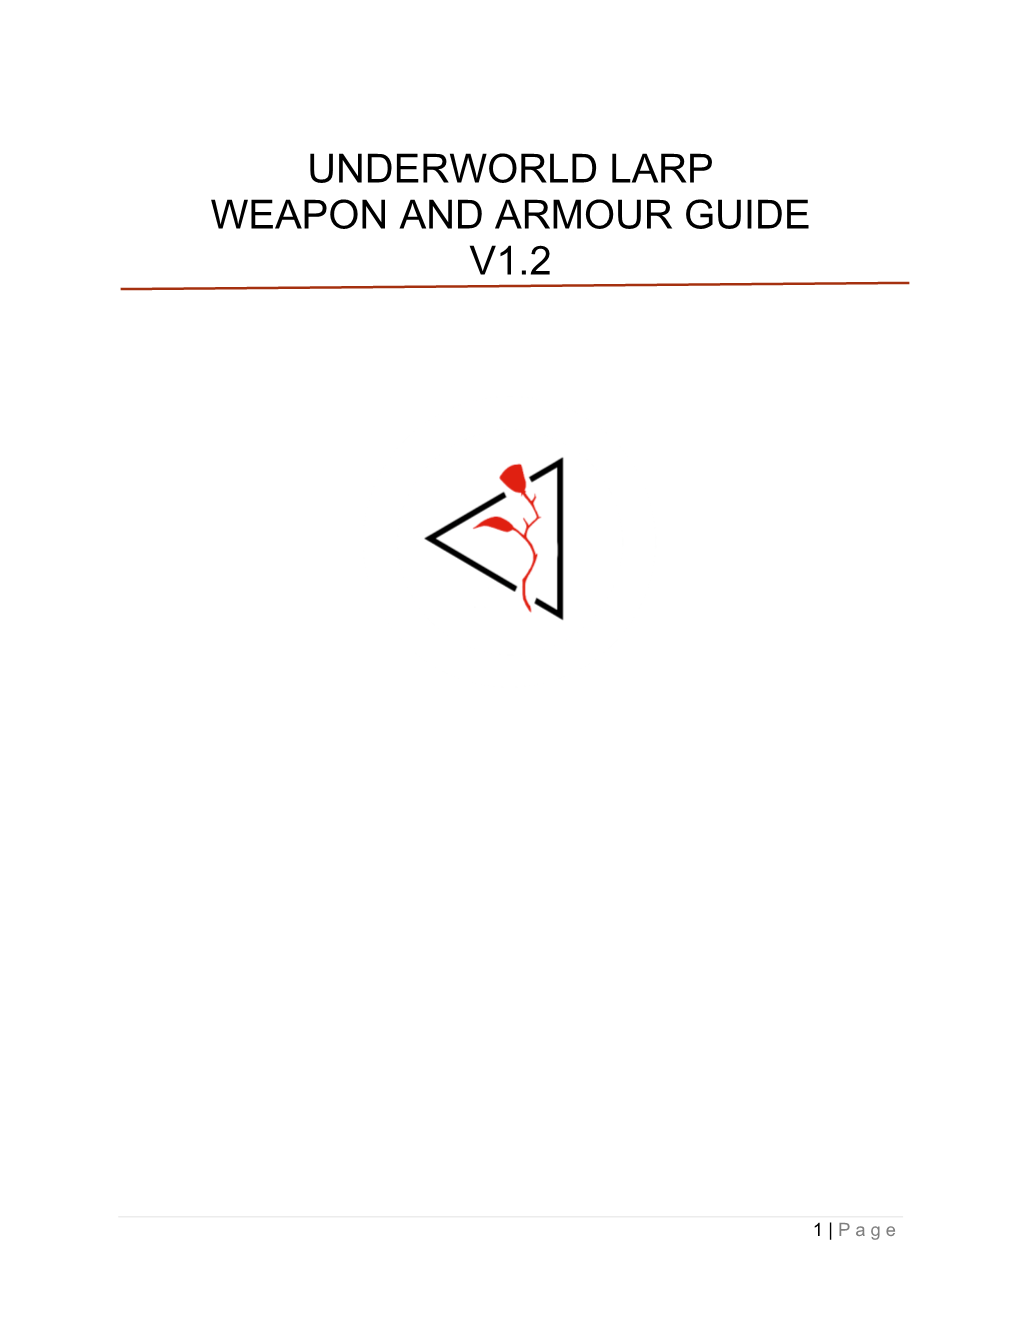 Underworld Larp Weapon and Armour Guide V1.2